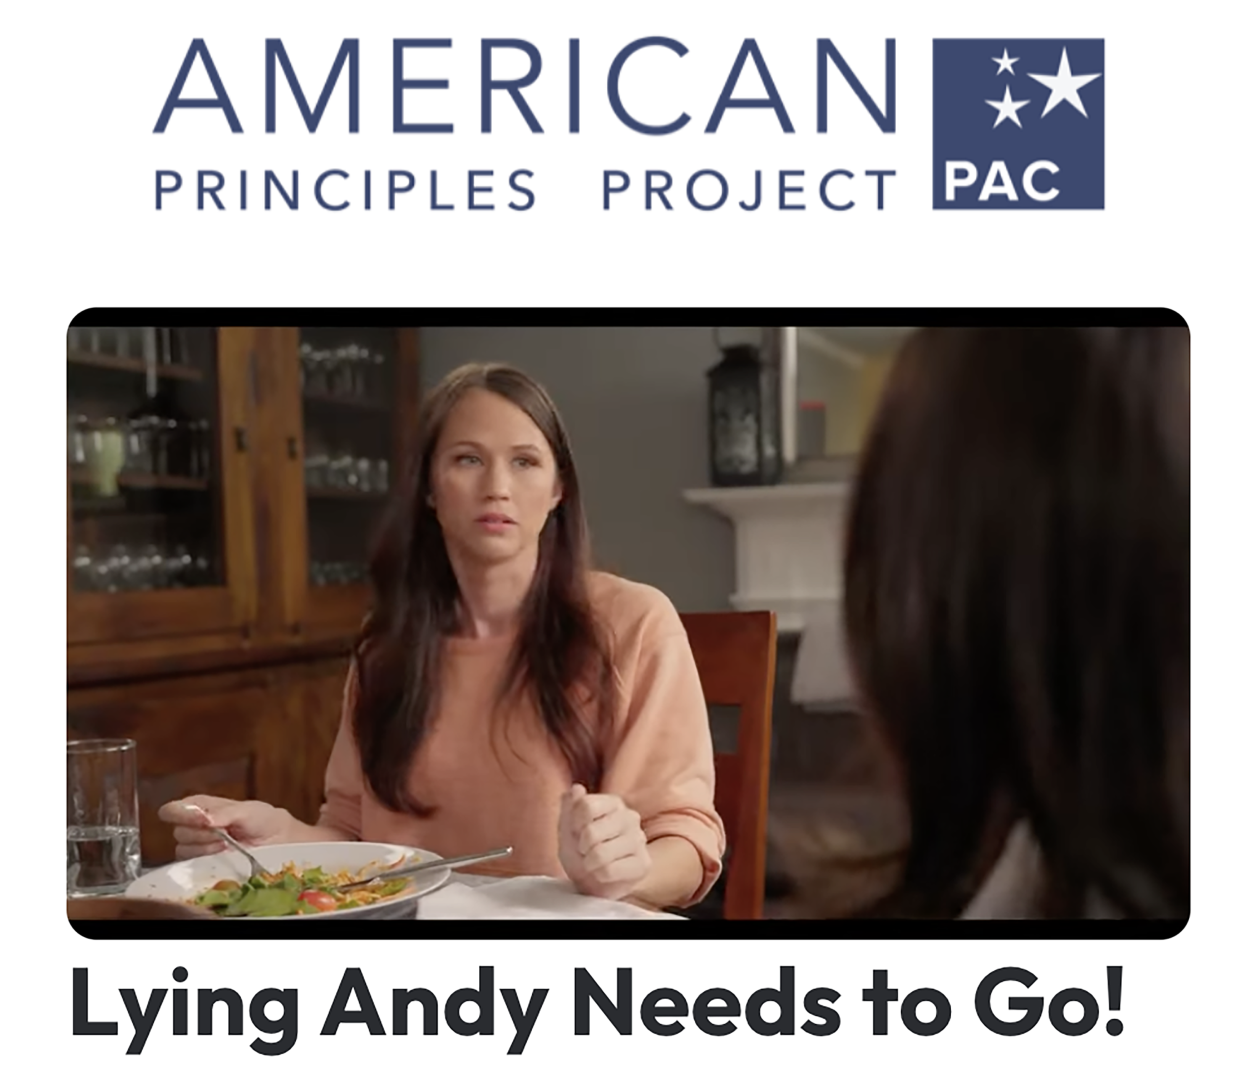 The American Principles Project is running an ad that claims Andy Beshear is lying about things. Ironically, the ad is patently untrue.